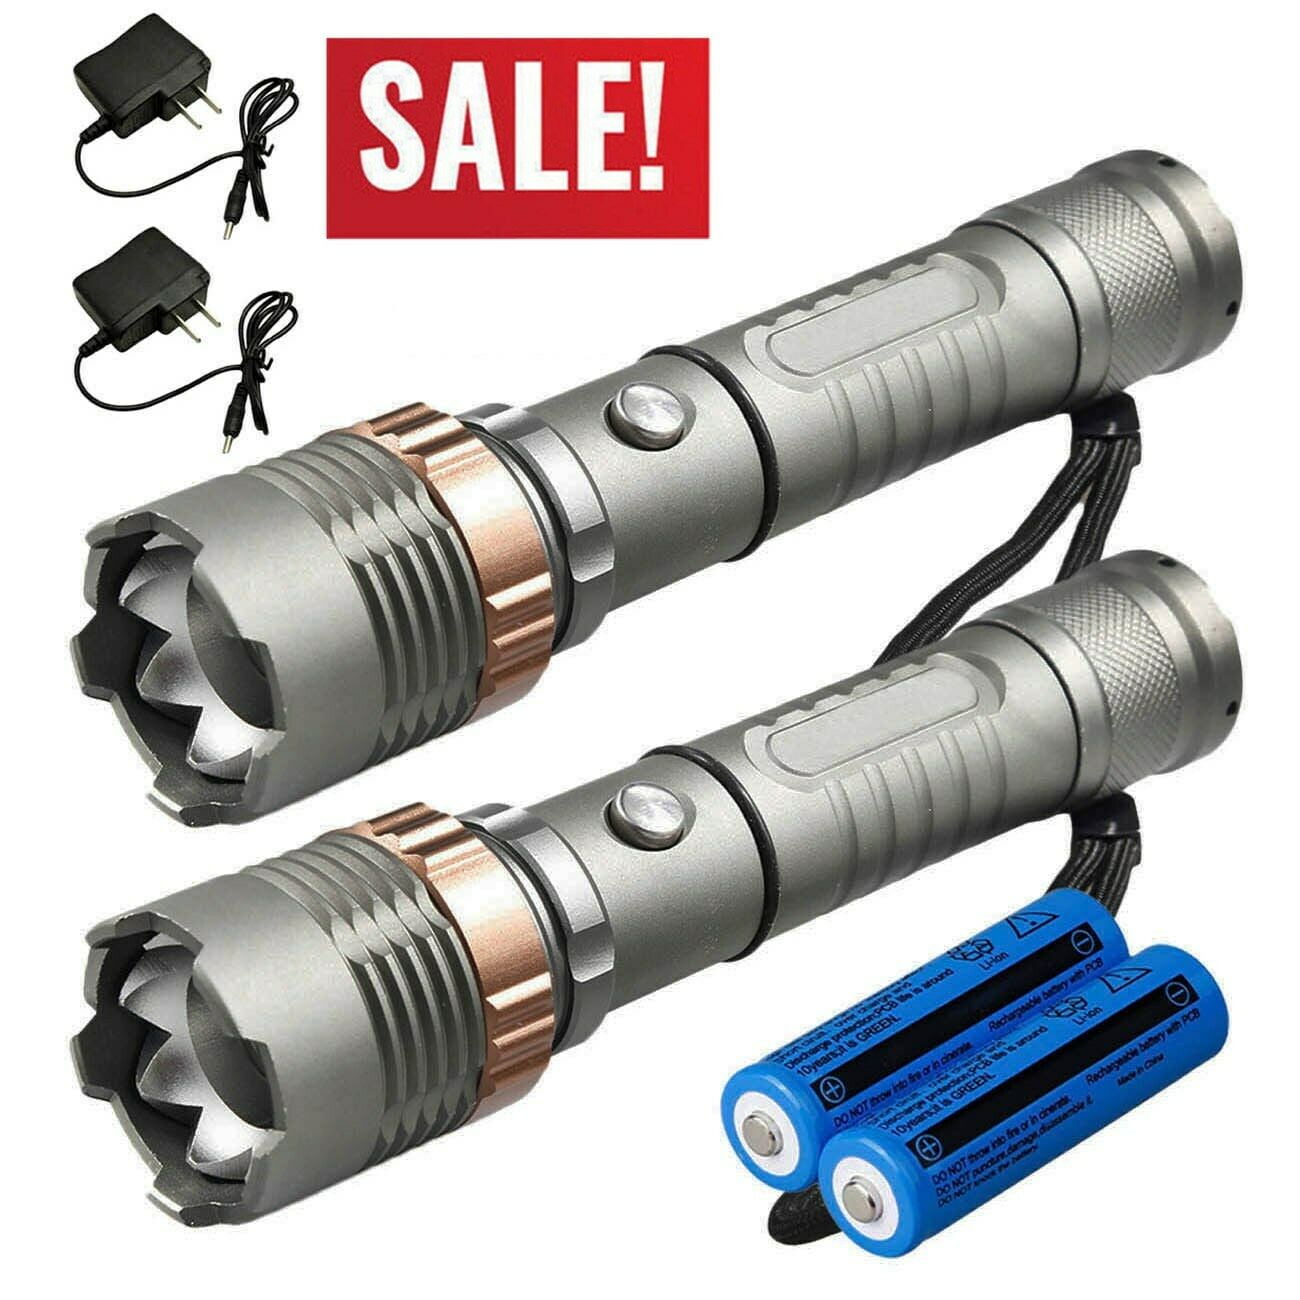 Tactical Police 990000LM 5-Mode 7 x LED Flashlights Powerful Super Bright Torch 